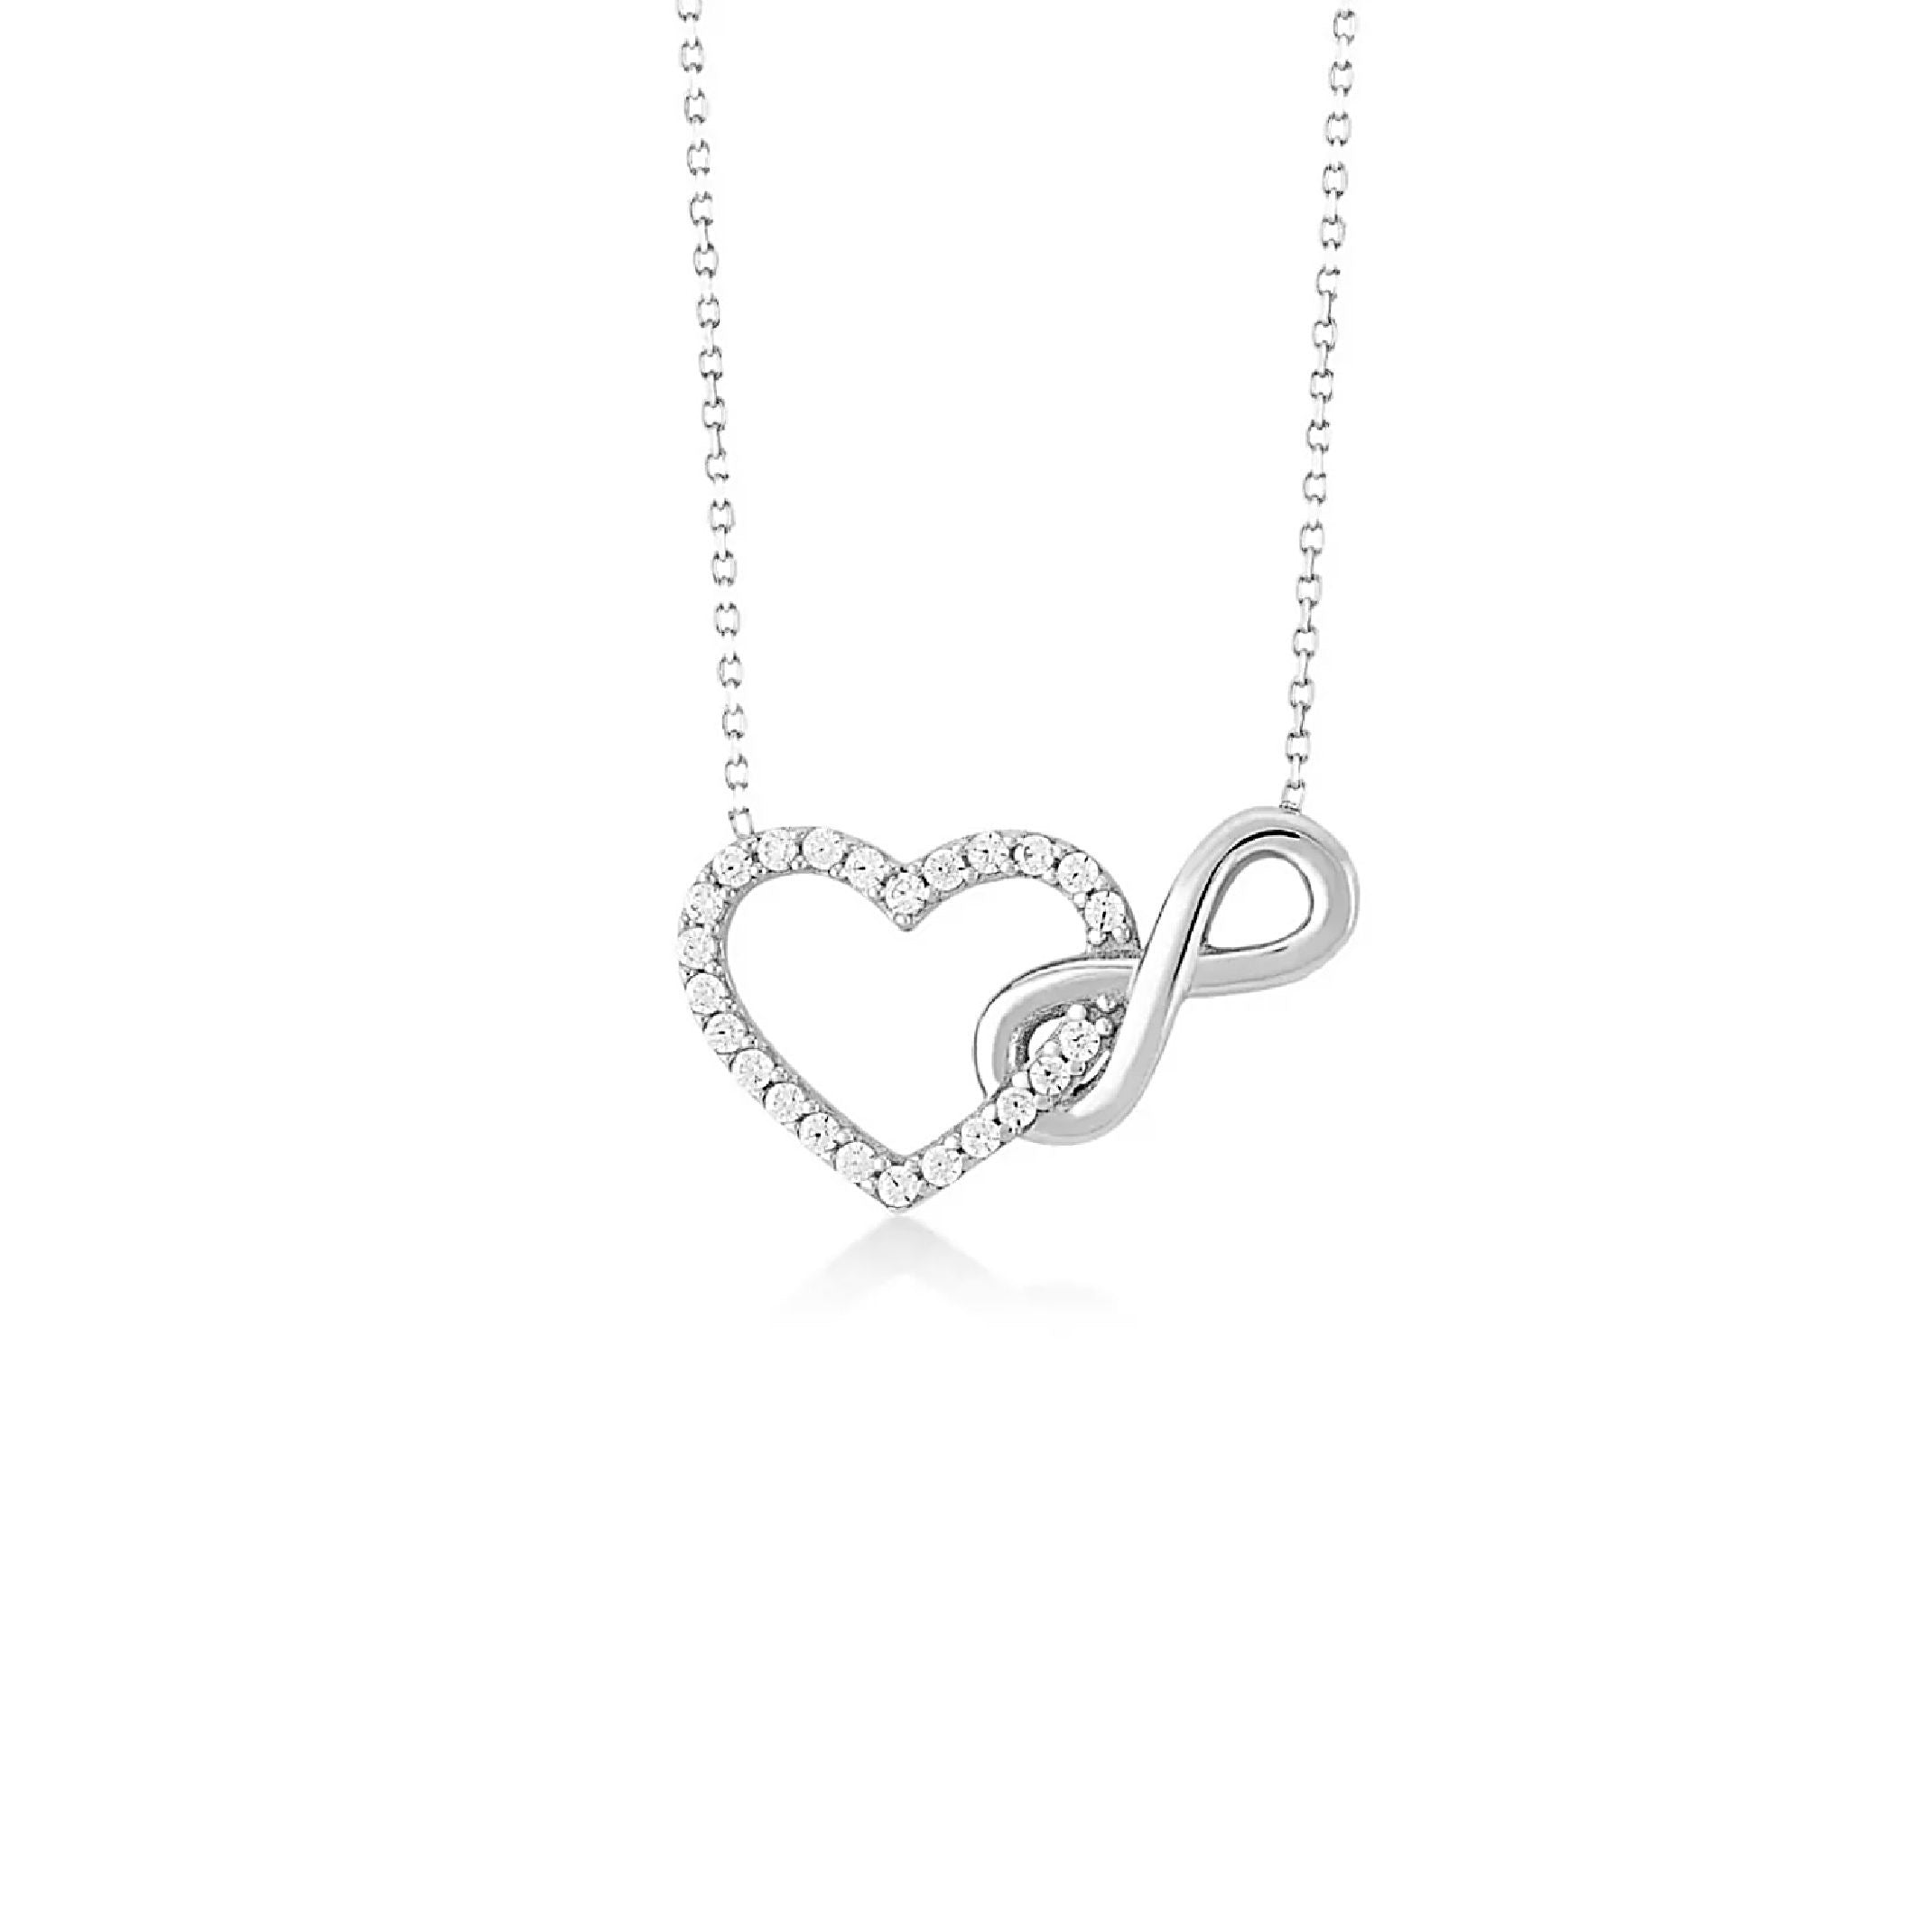 Buy Infinity Heart Necklace,polyamorous Symbol Necklace, Heart Necklace, Infinity  Necklace, Gifts for Her, Friendship Necklace, Mother Gifts, Wi Online in  India - Etsy